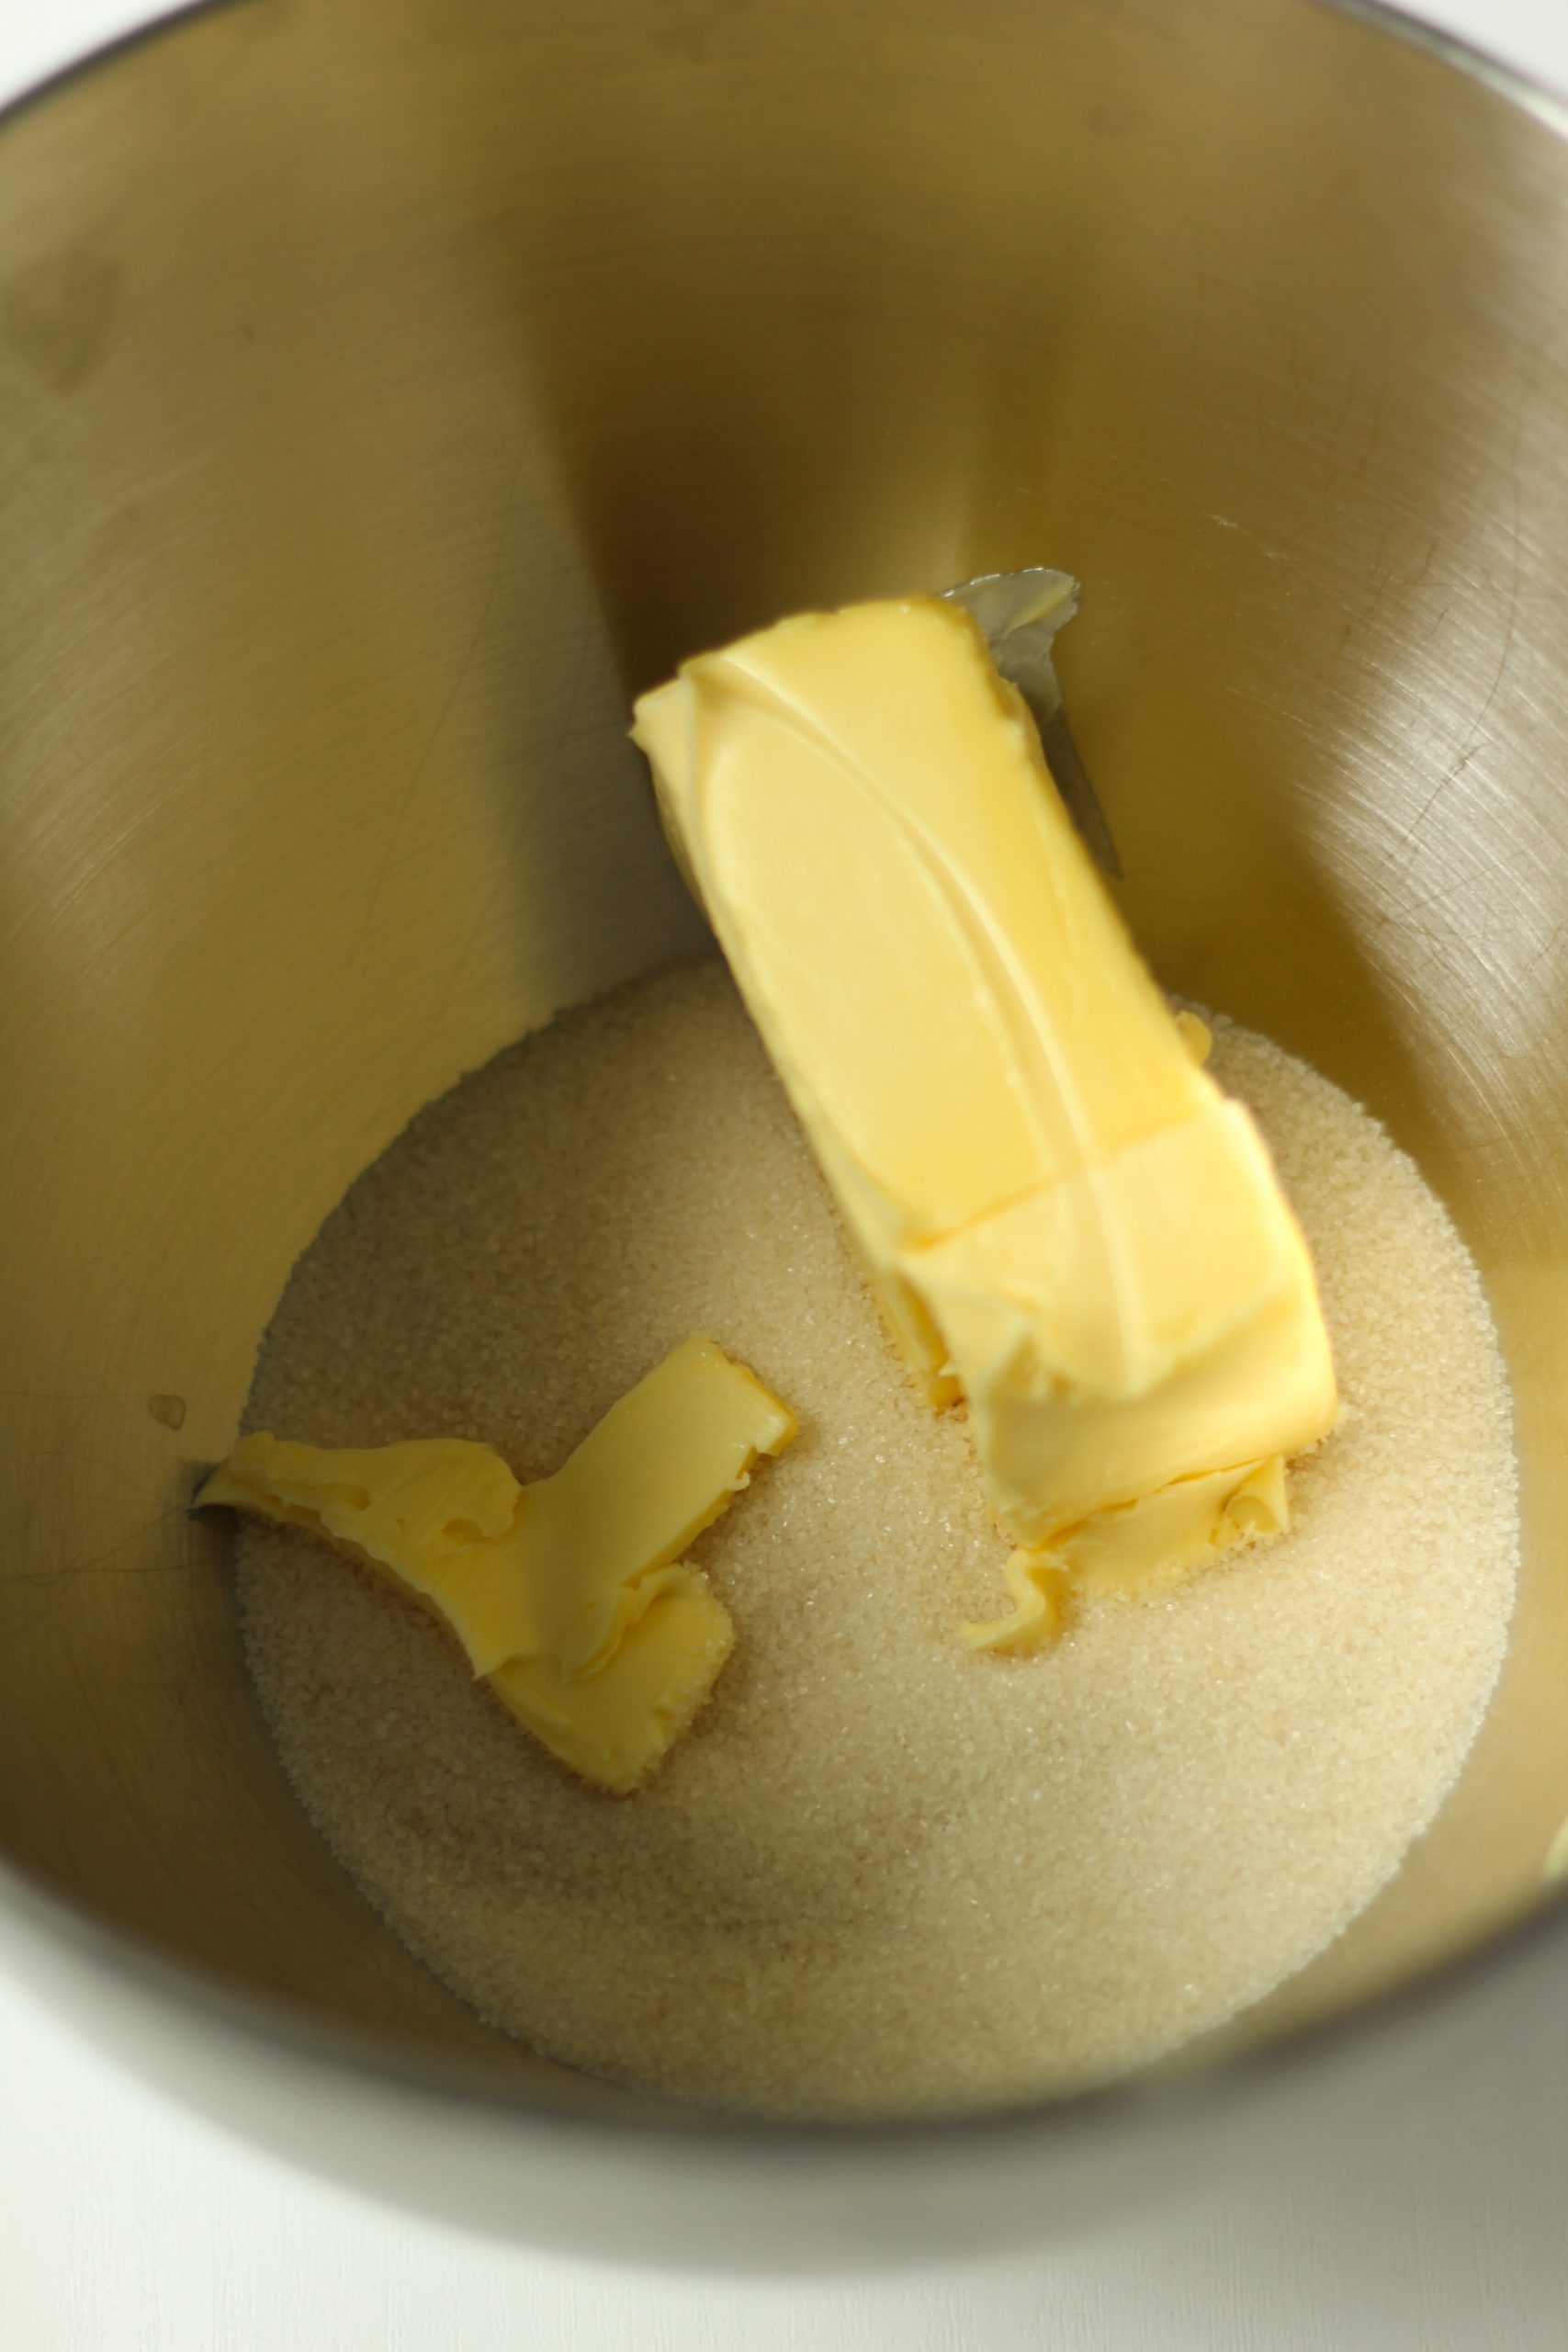 Cane sugar and softened butter